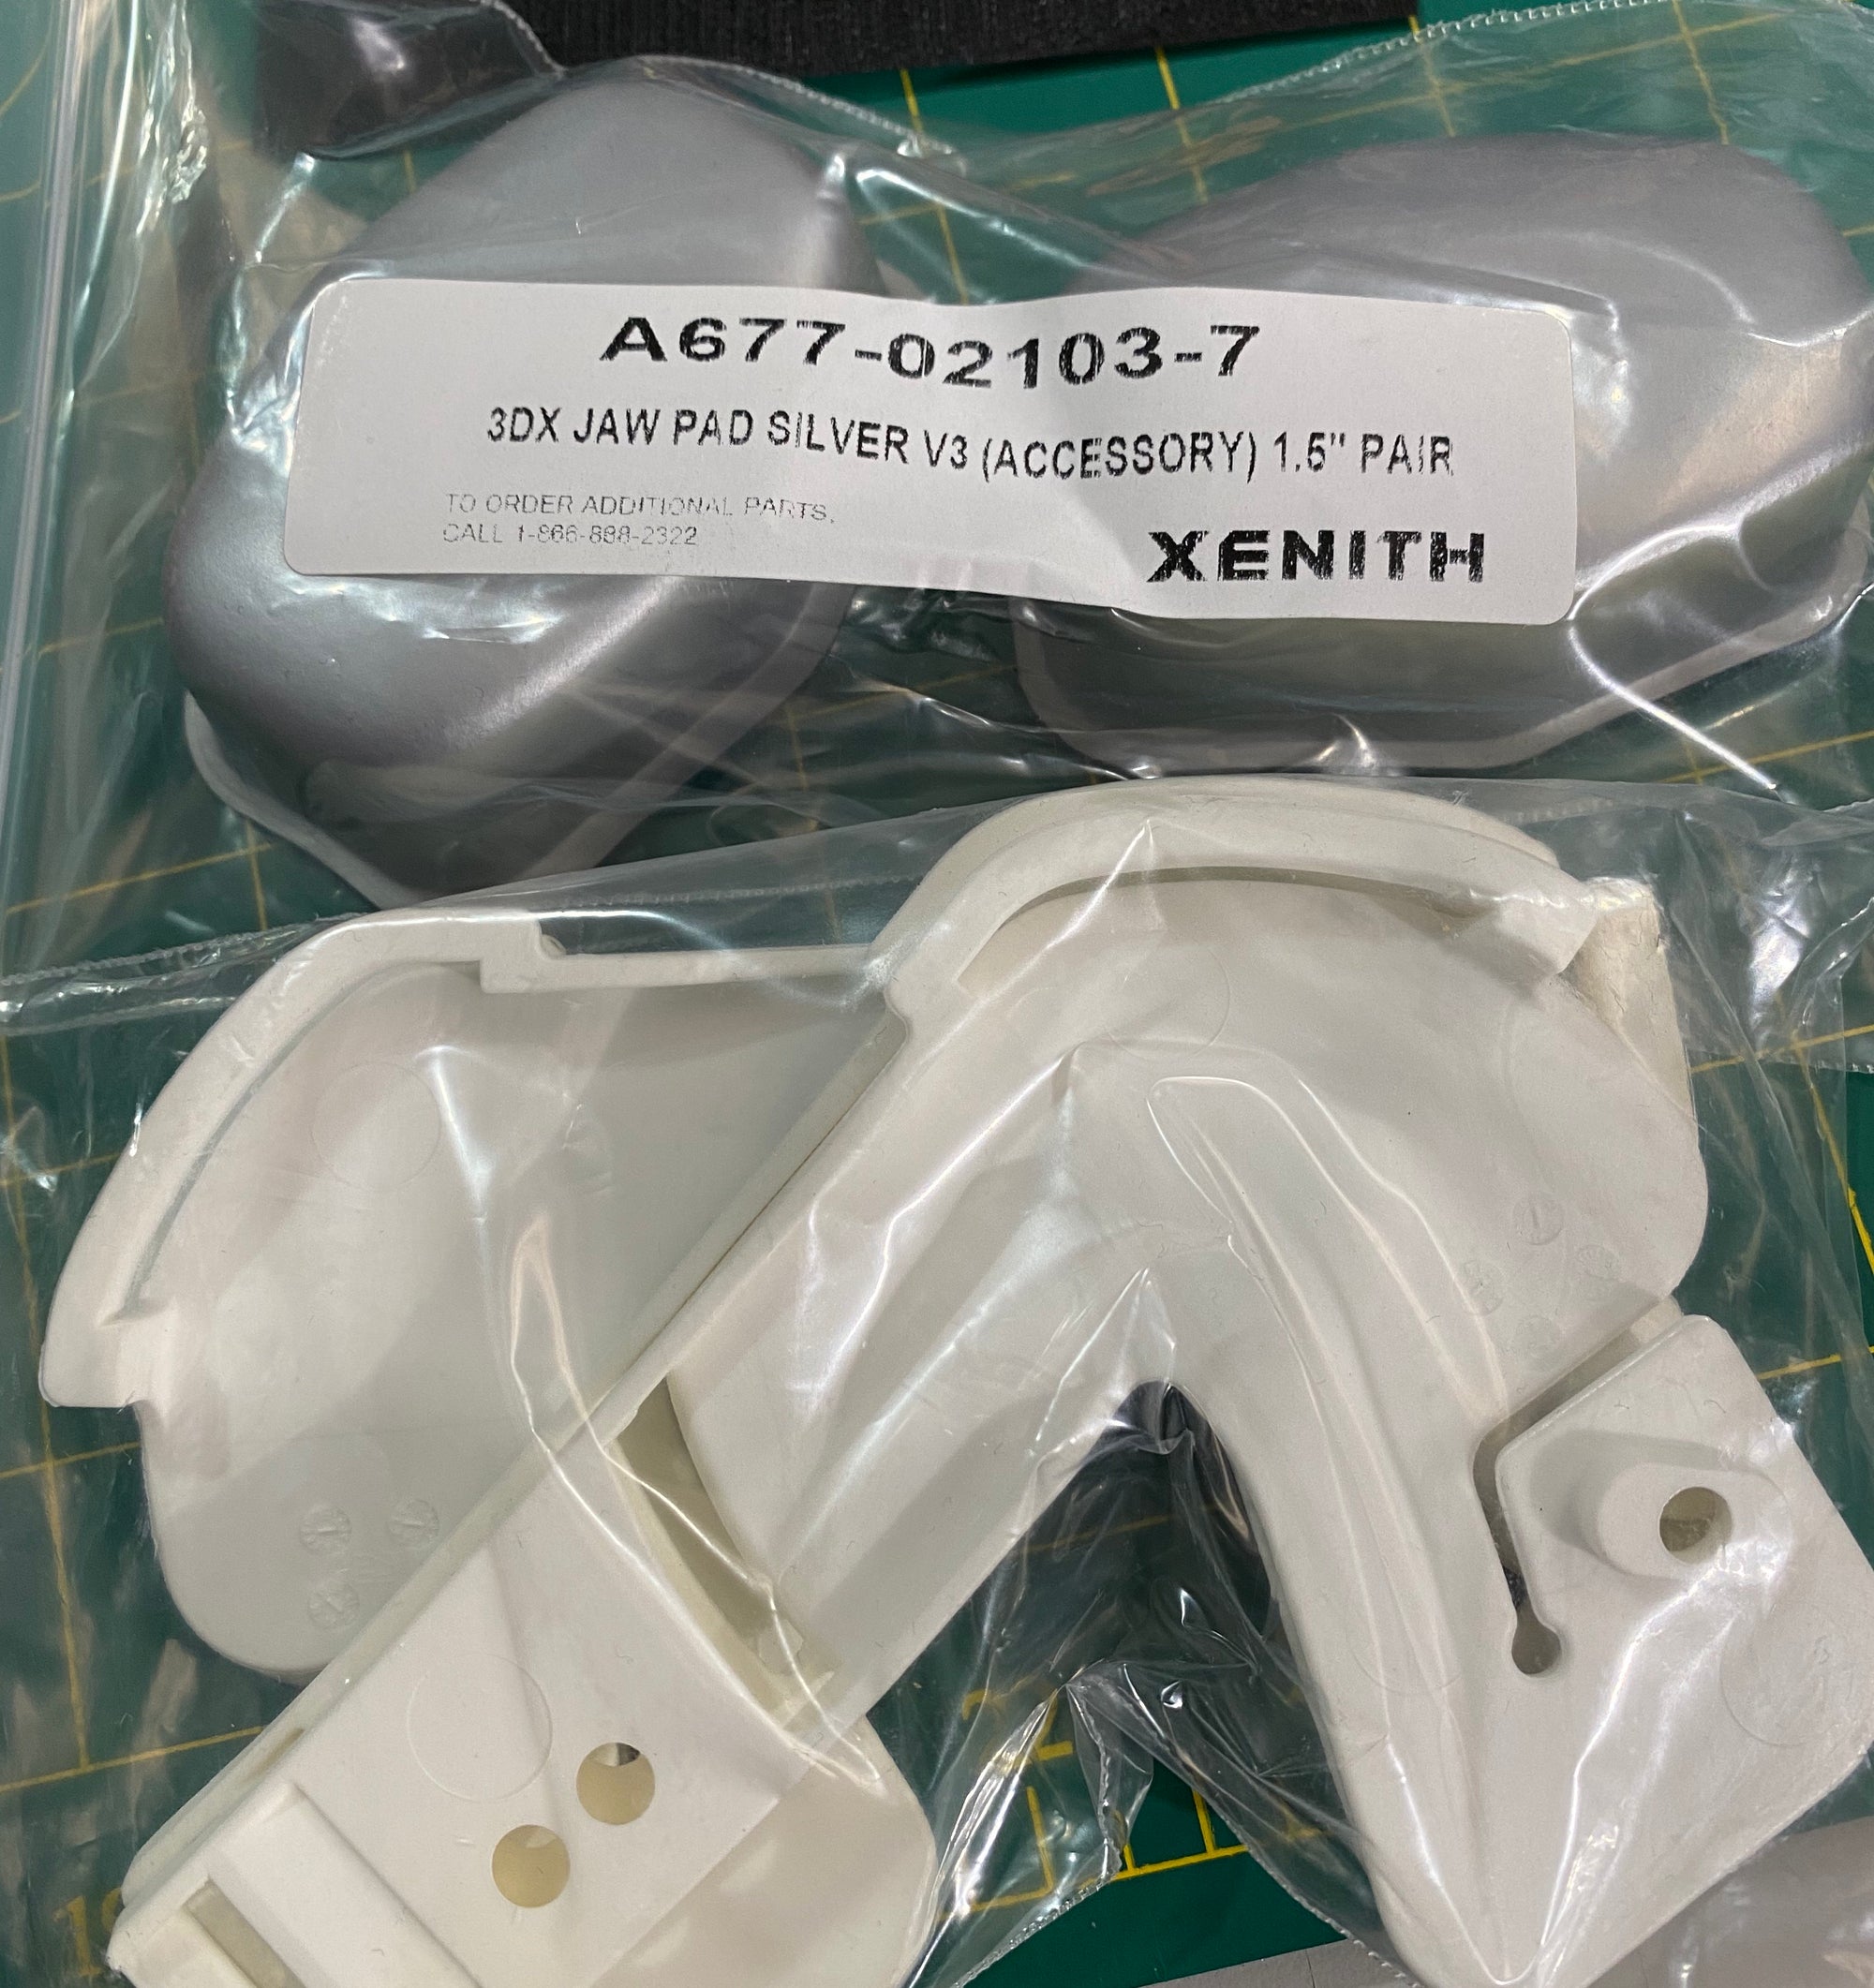 Xenith X2 Jaw Pad Upgrade Kit